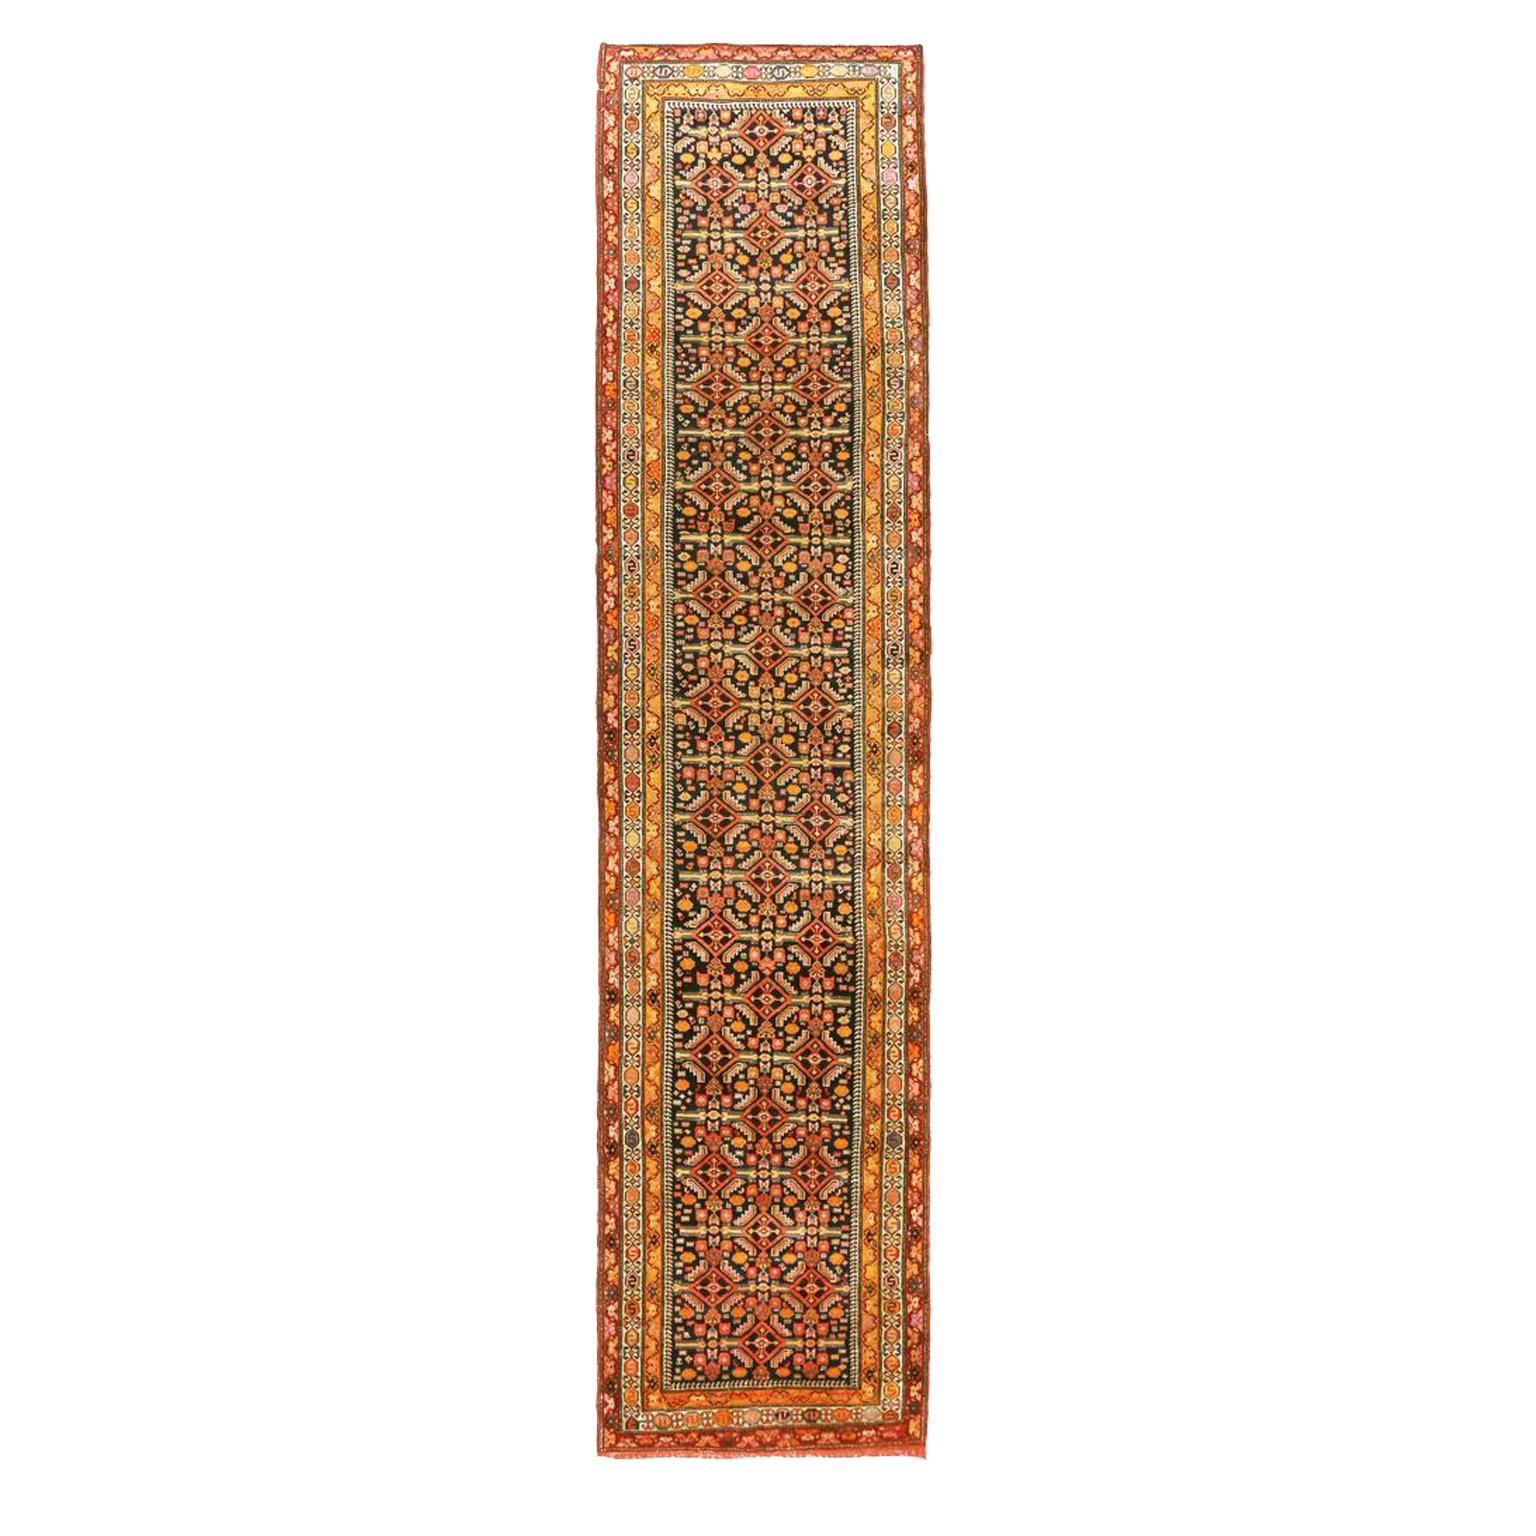 Handwoven from the finest wool, this antique Persian rug features fine floral designs infused with ornate geometric patterns familiar with many Azerbaijan carpets. It has a navy blue background mixed with orange, red and pink hues to showcase all